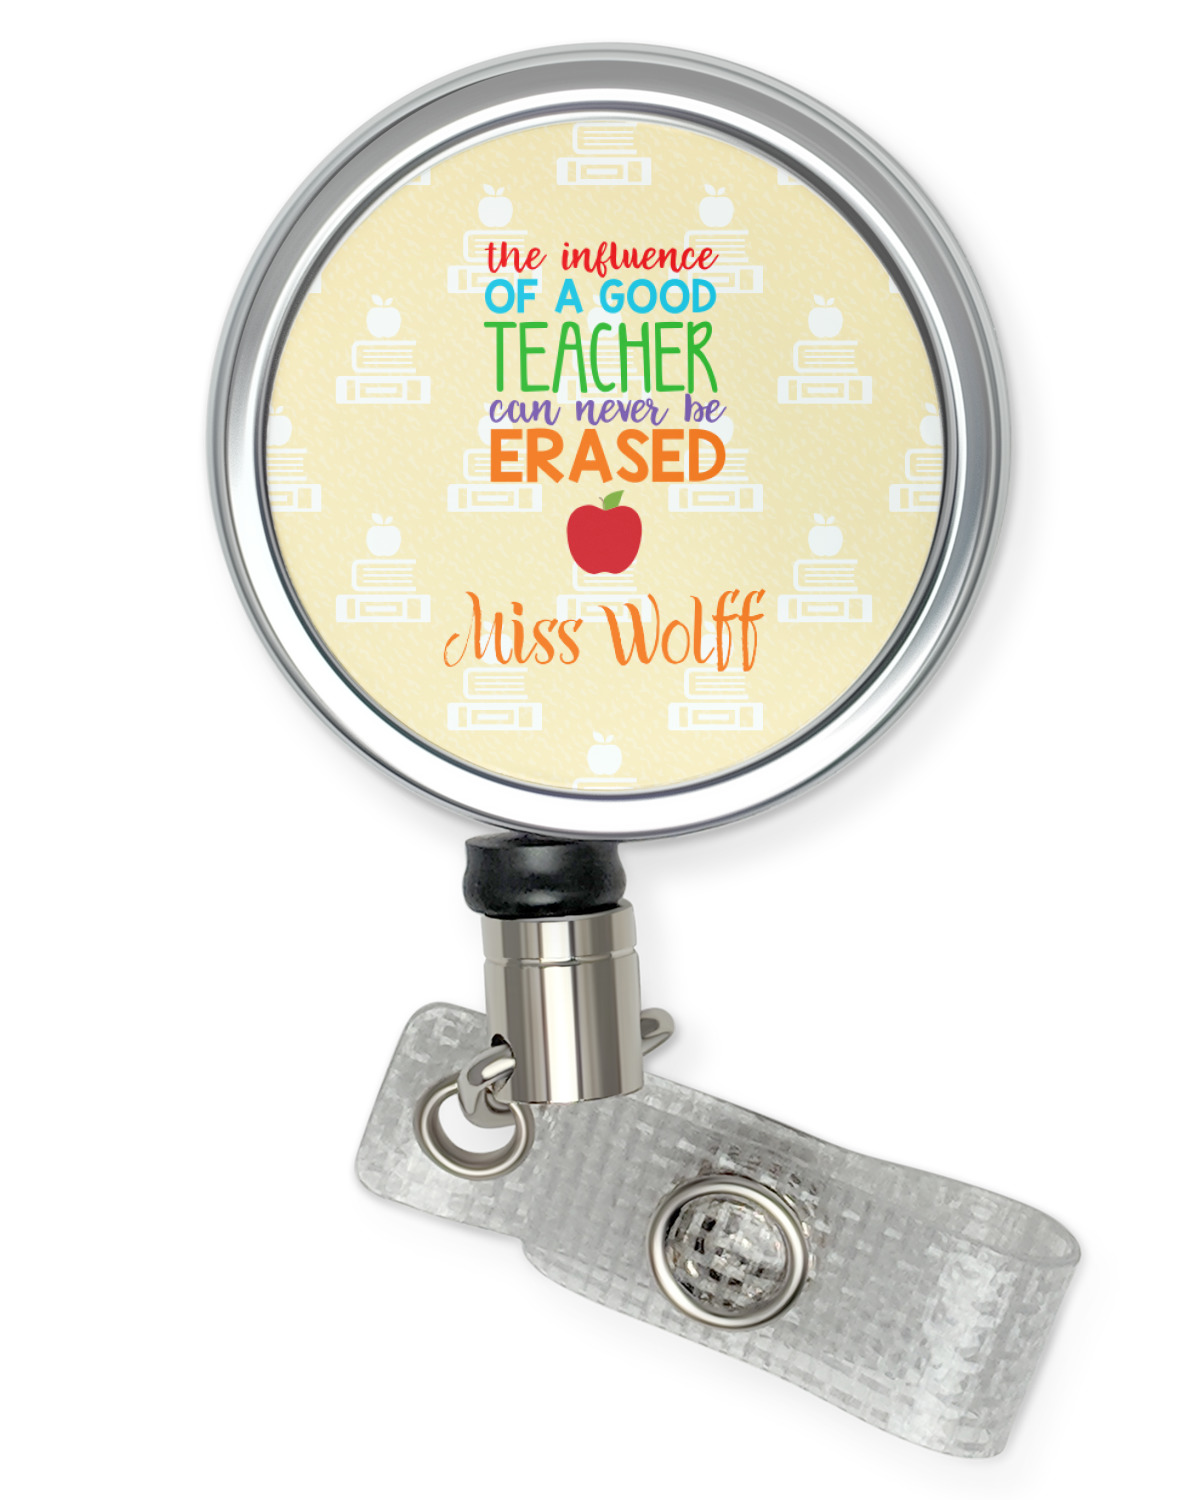 https://www.youcustomizeit.com/common/MAKE/1038343/Teacher-Quotes-and-Sayings-Retractable-Badge-Reel-Flat.jpg?lm=1709043010